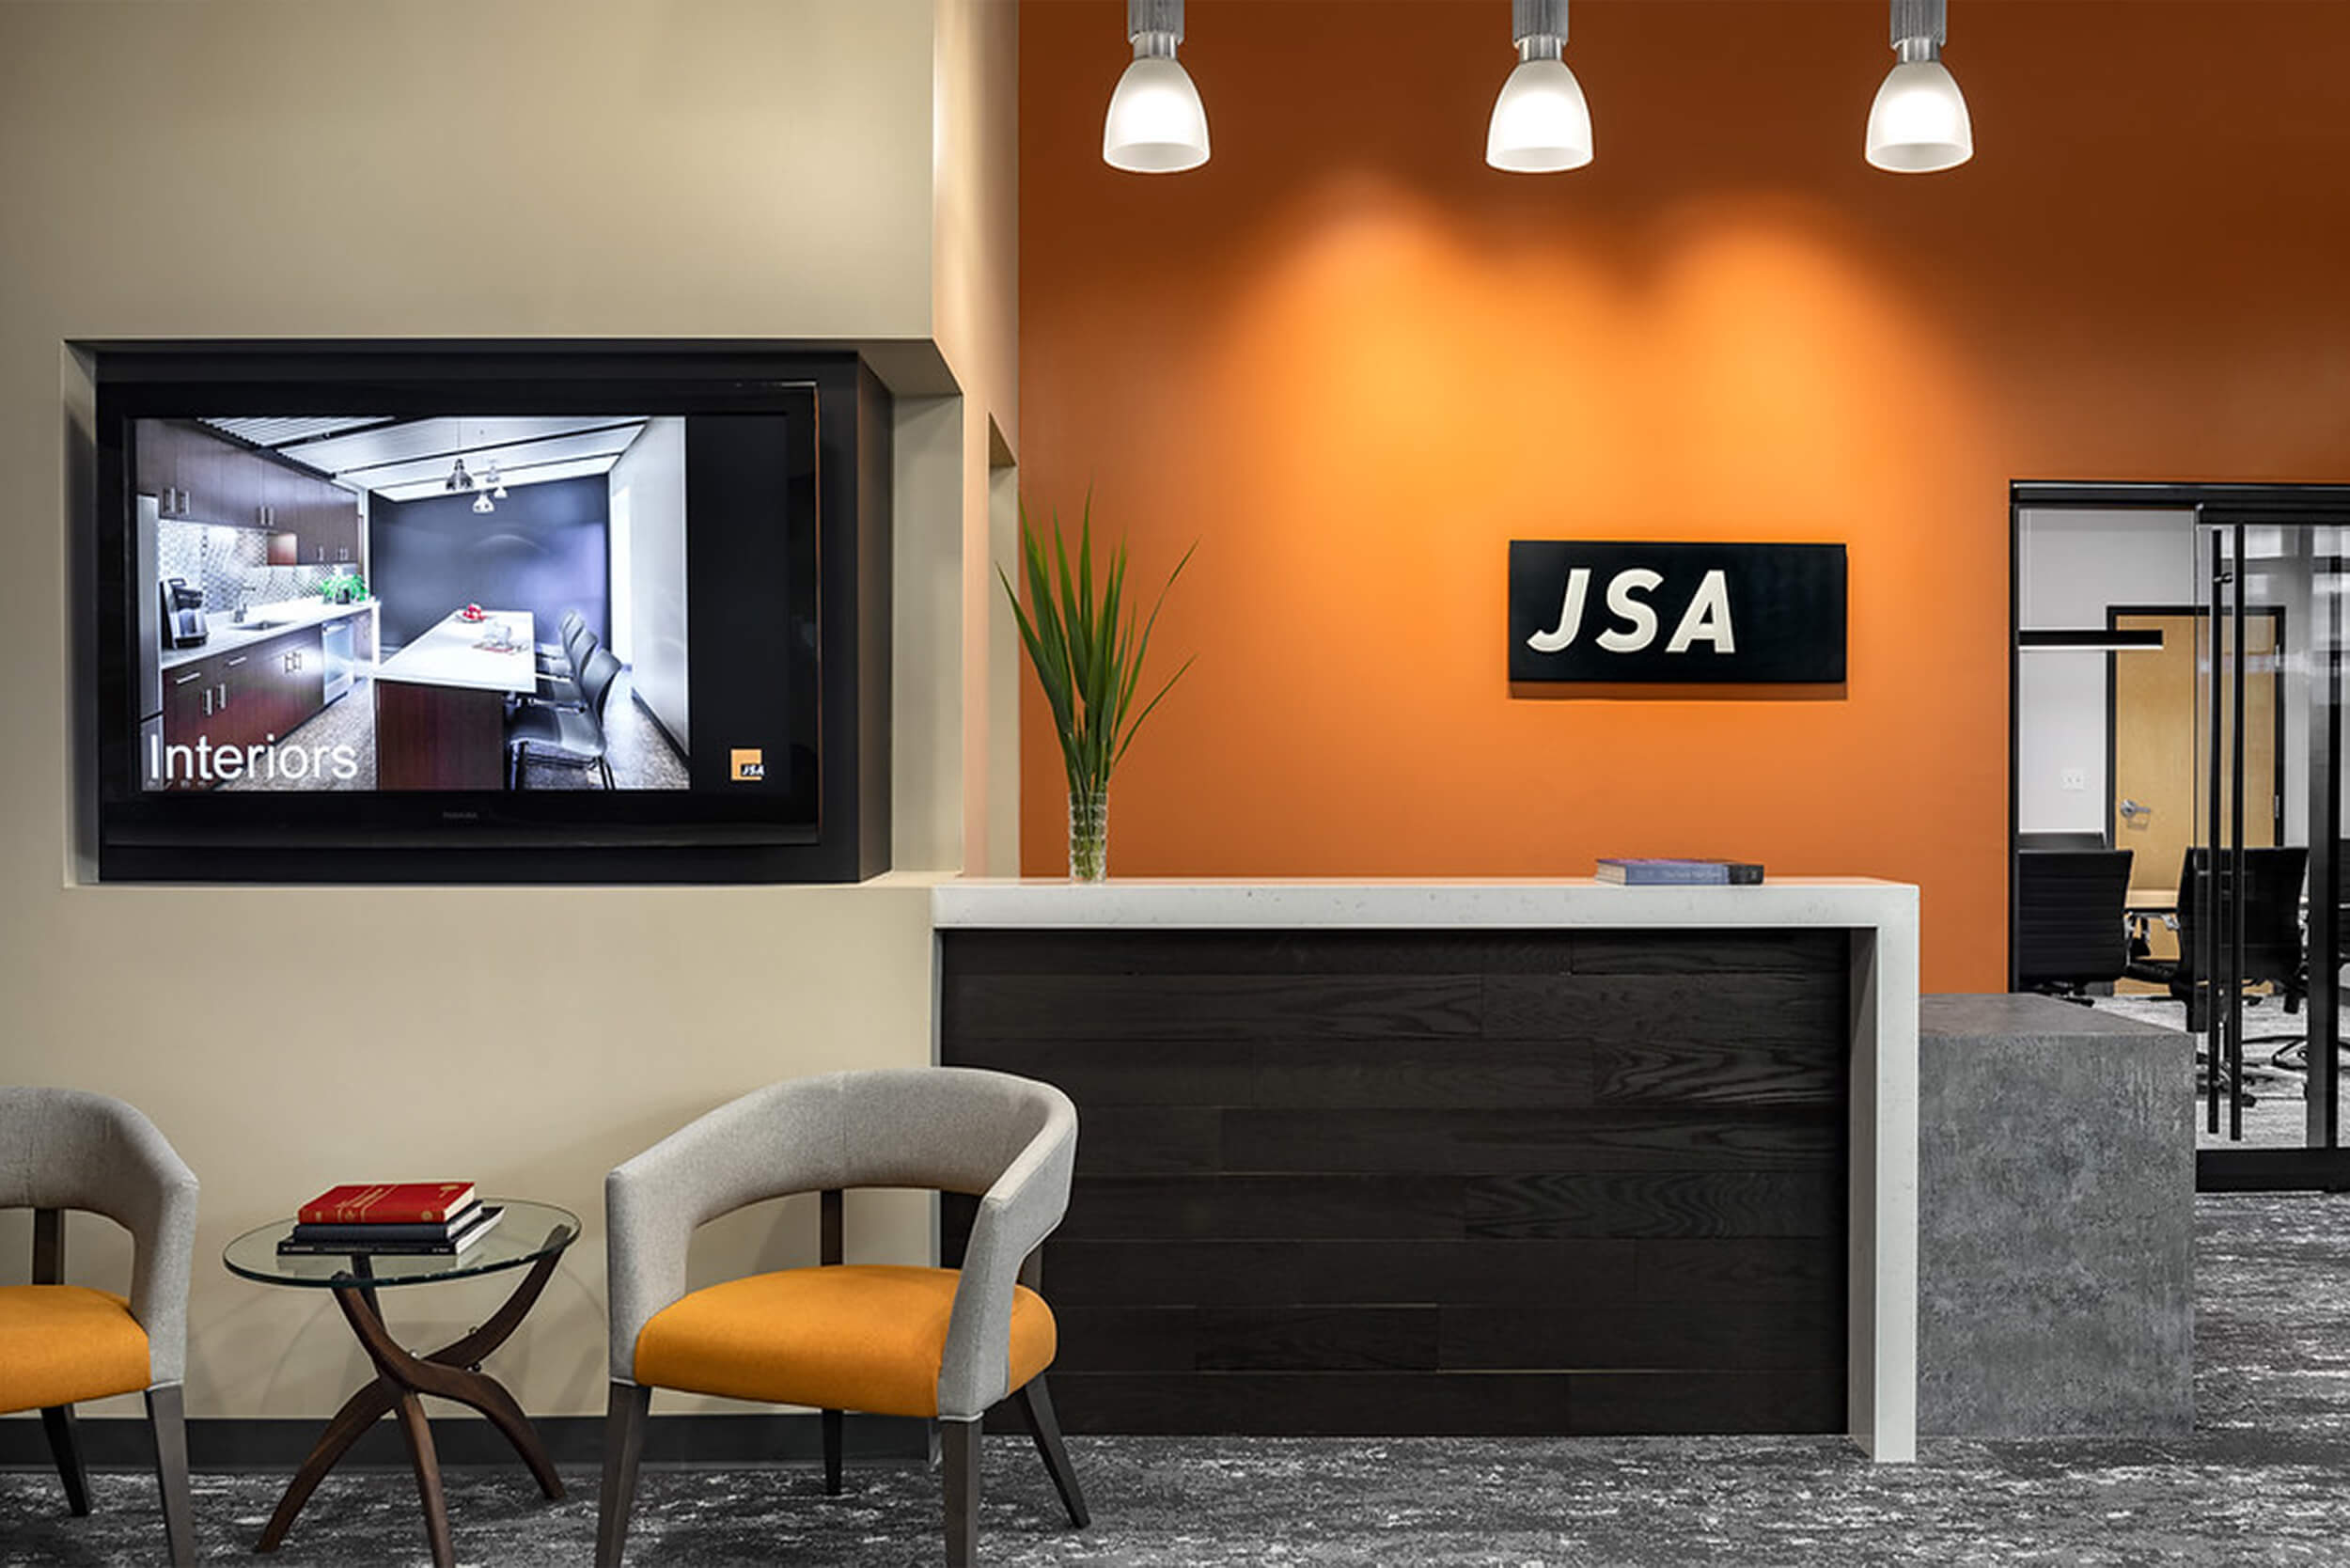 Photo of the interior entryway of JSA Inc's office. The photo features a dark wood paneled front reception area desk, with a bright orange wall behind it with a logo plaque of "JSA". To the left of the desk, there is a small seating area with two orange and grey chairs and an end table, and a video monitor on the wall is showing photos of interior design work.